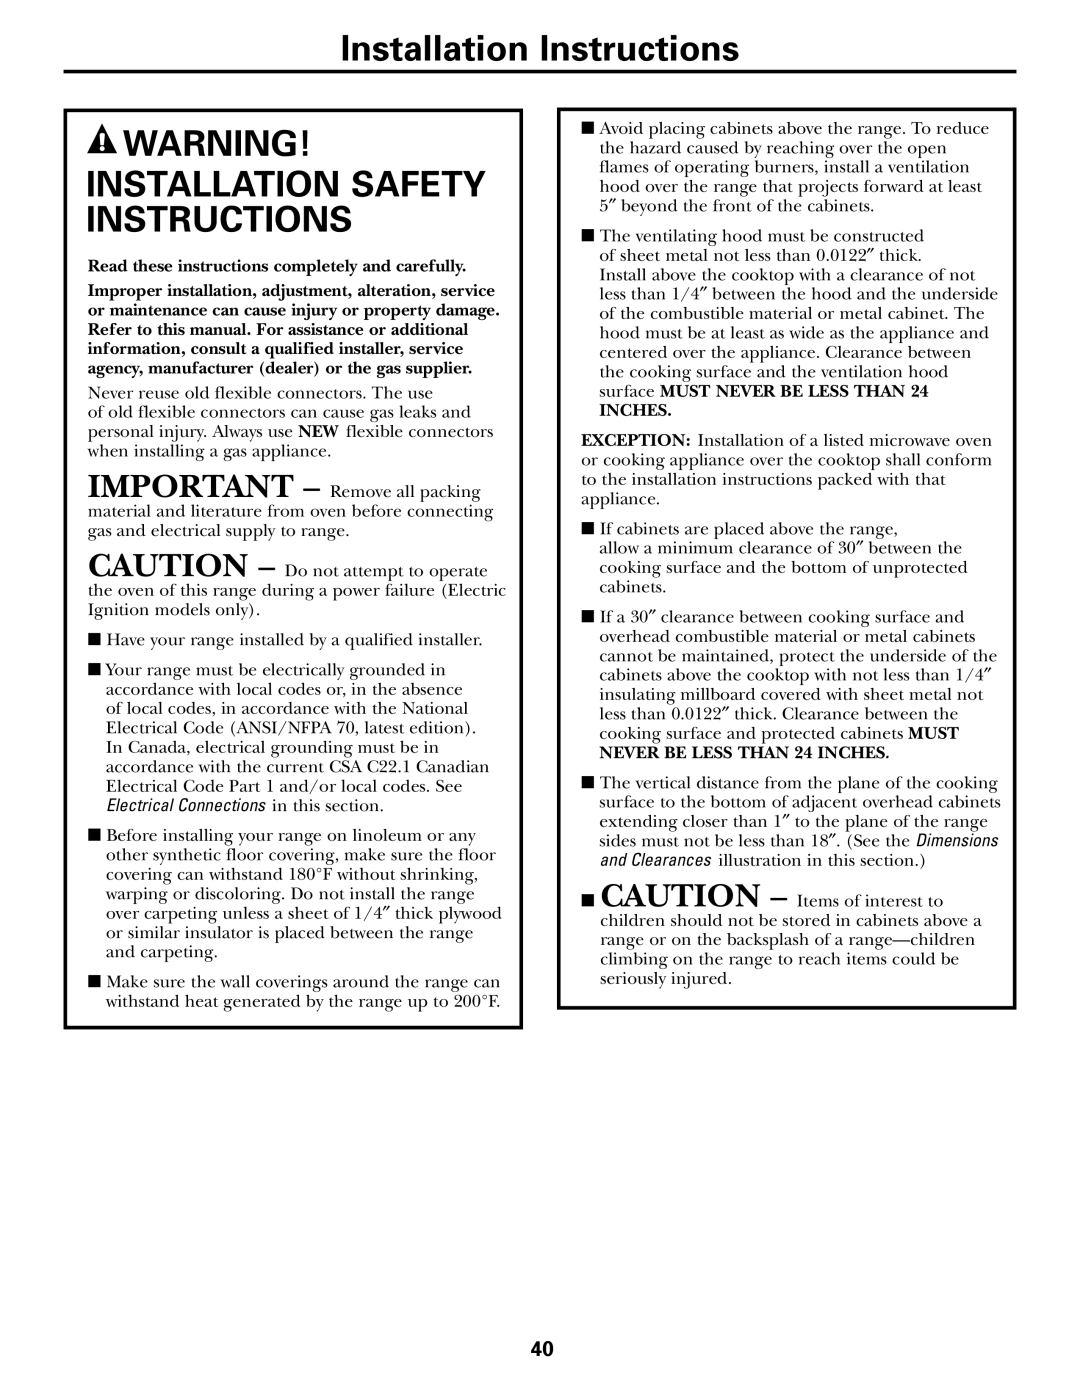 GE CGS980 Installation Instructions, Installation Safety Instructions, Electrical Connections in this section 